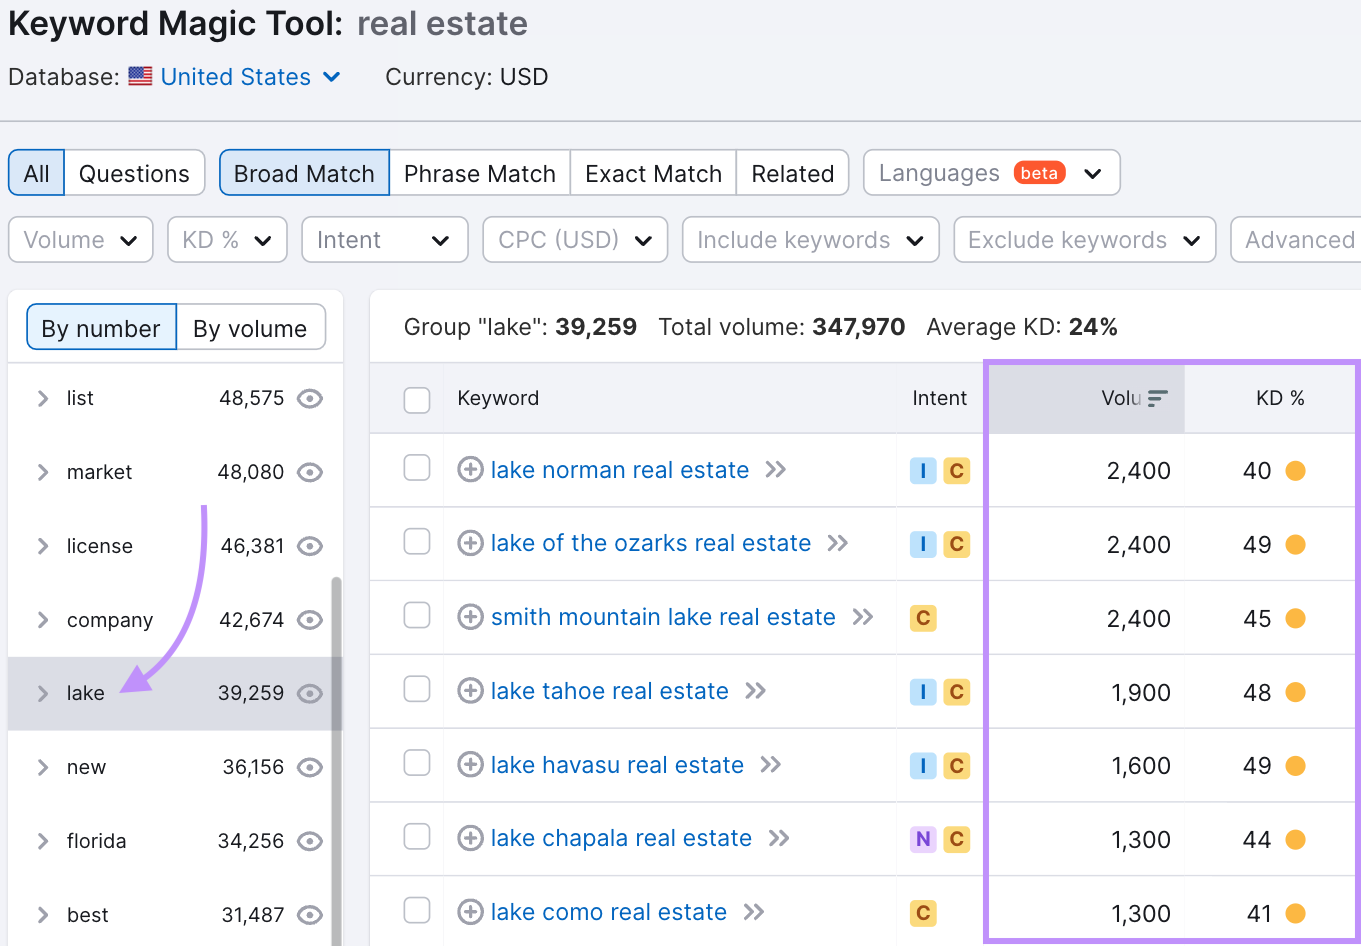 Keyword Magic Tool results for "real estate" narrowed by "lake" group